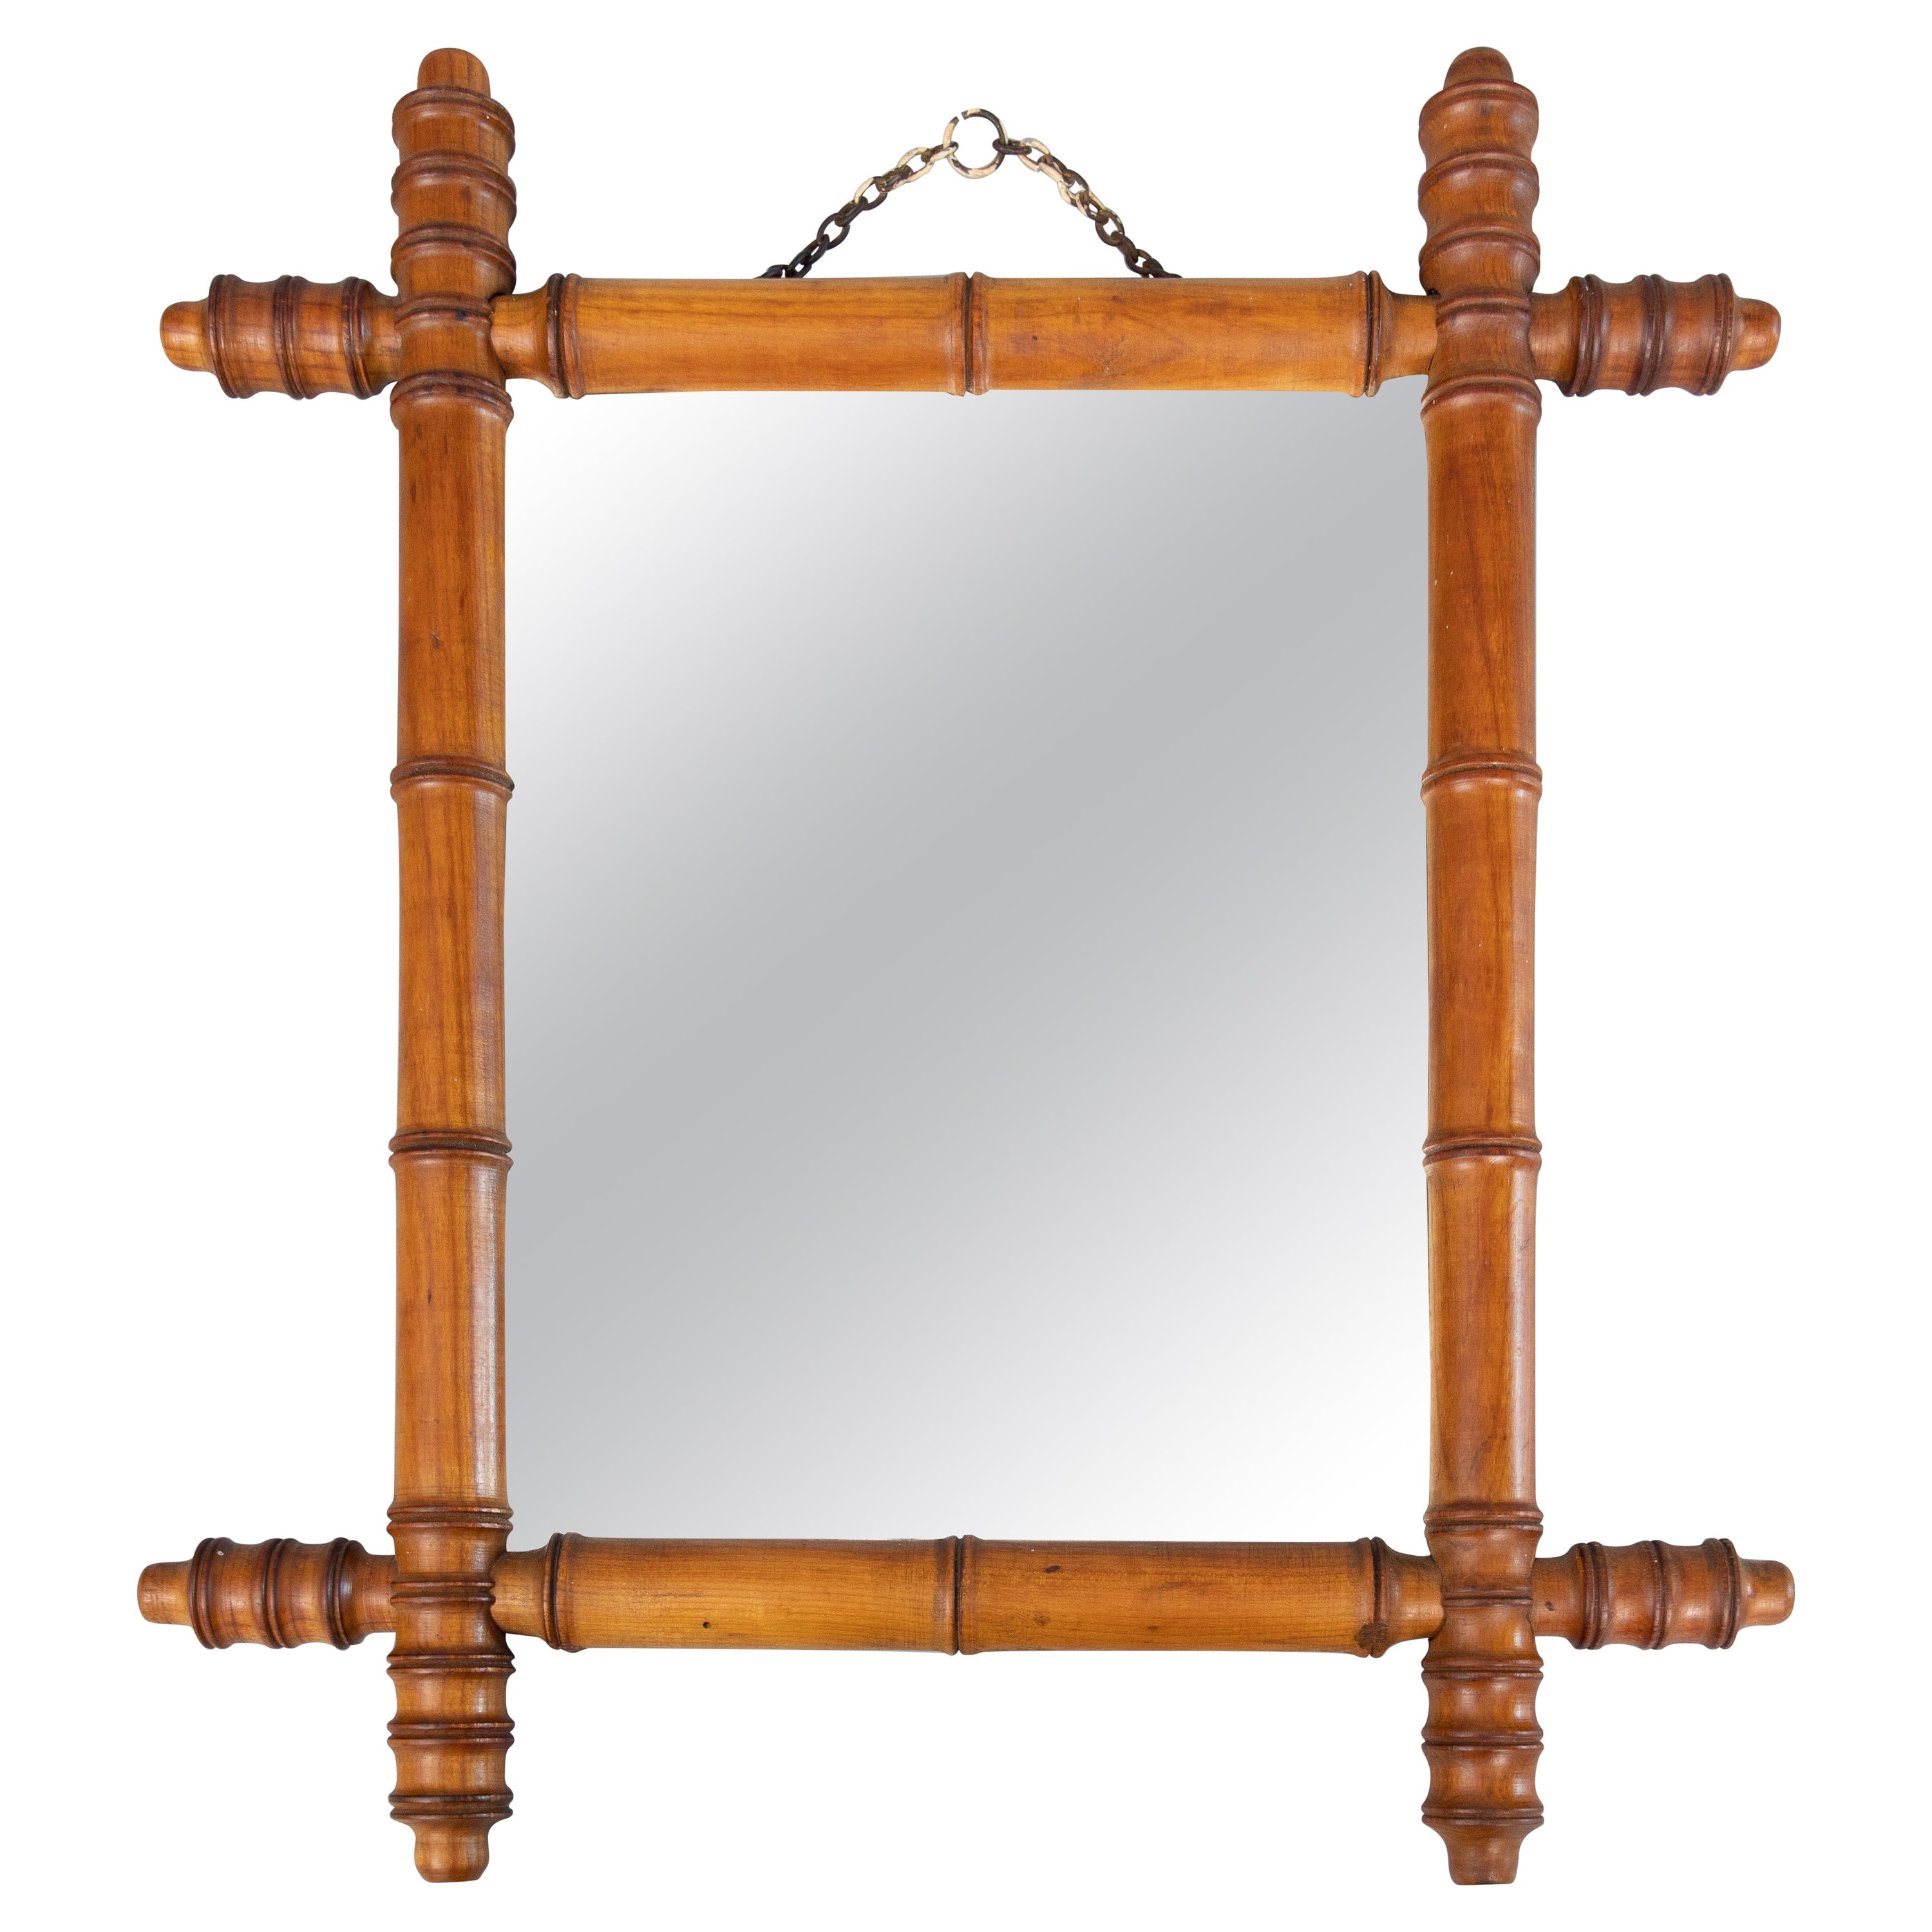 Antique French Faux Bamboo Carved Mirror, Circa 1900